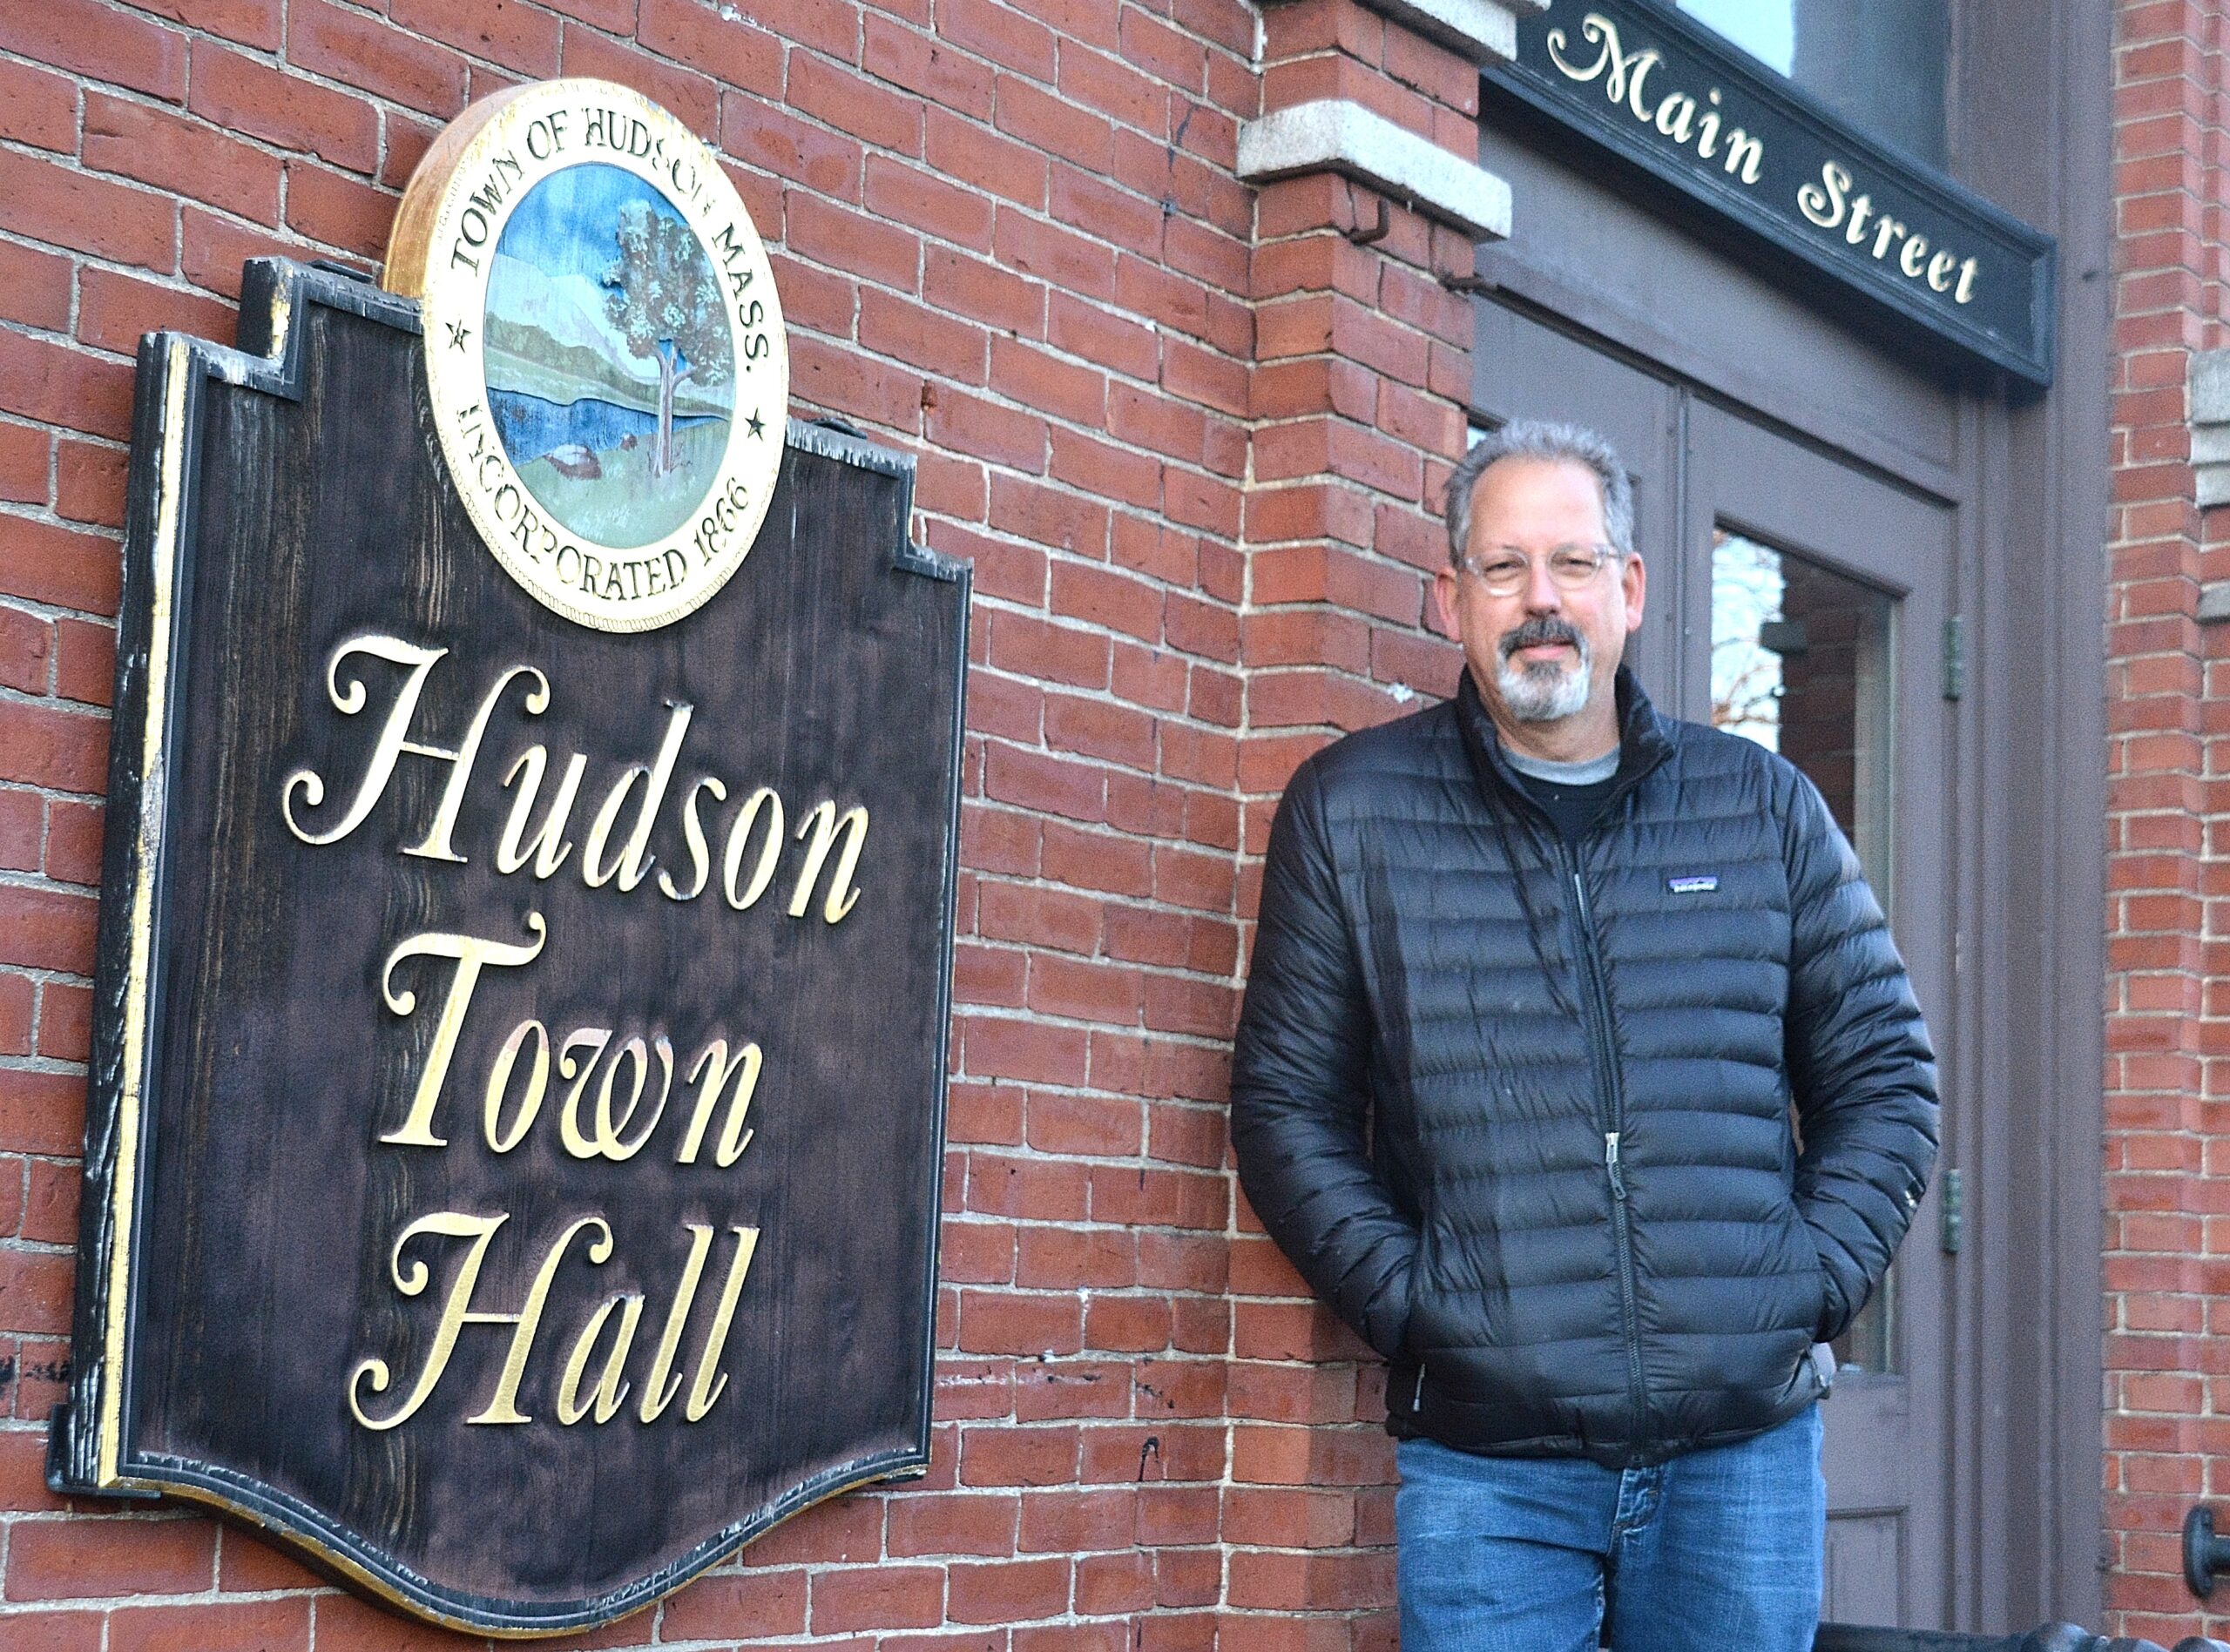 Paul Tucker with his signage at Hudson Town Hall.